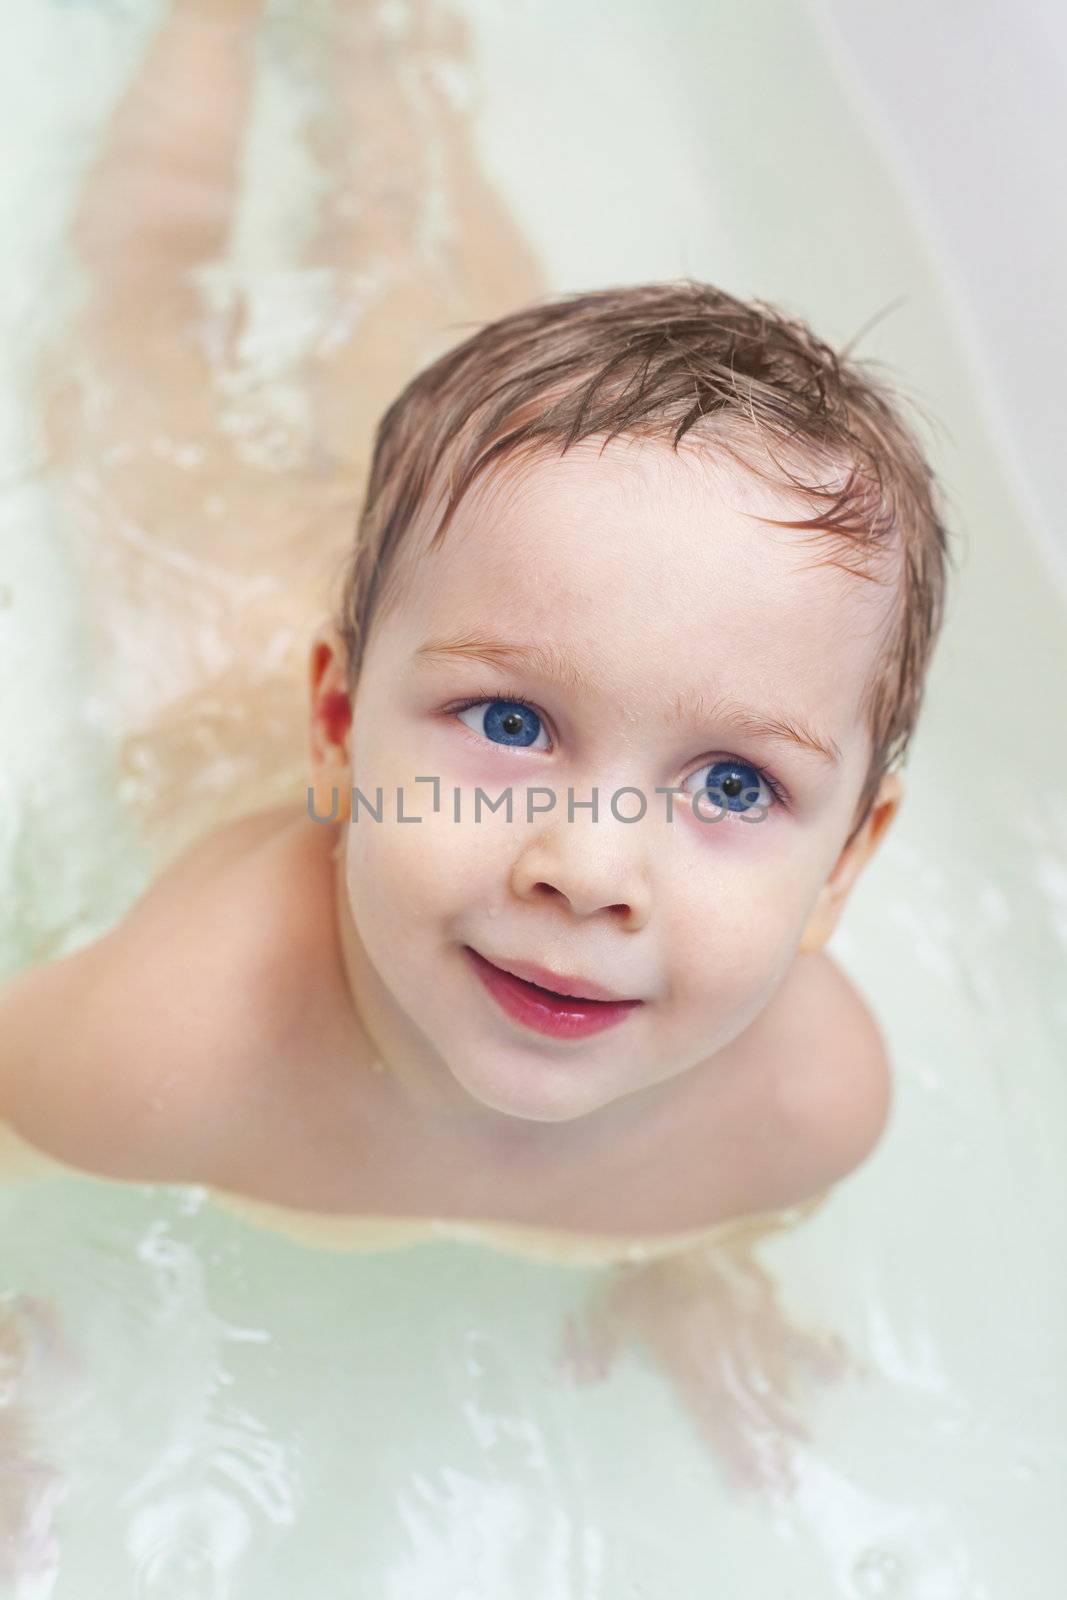 Baby taking bath and swim on chest by anelina